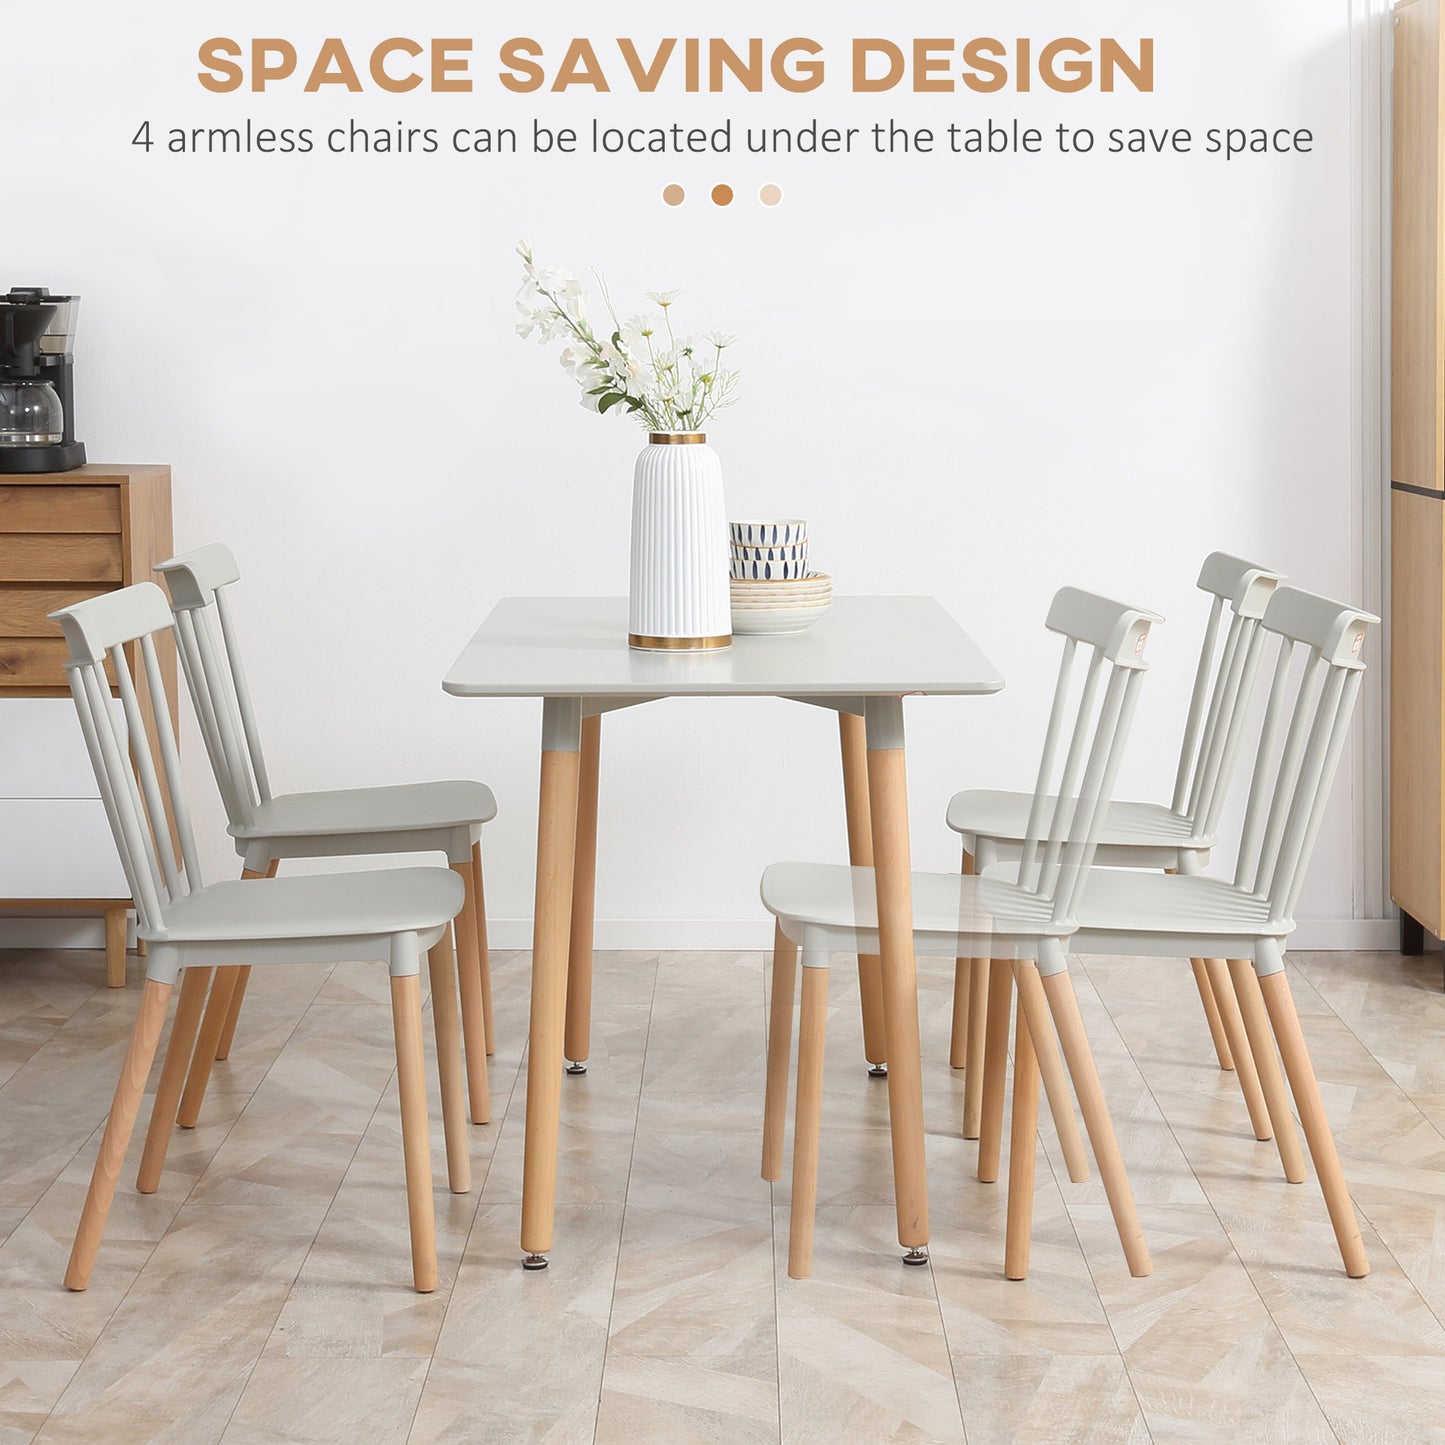 HOMCOM 5 Piece Dining Table Set with Beech Wood Legs Space Saving Table and 4 Chairs for Small Kitchens Grey